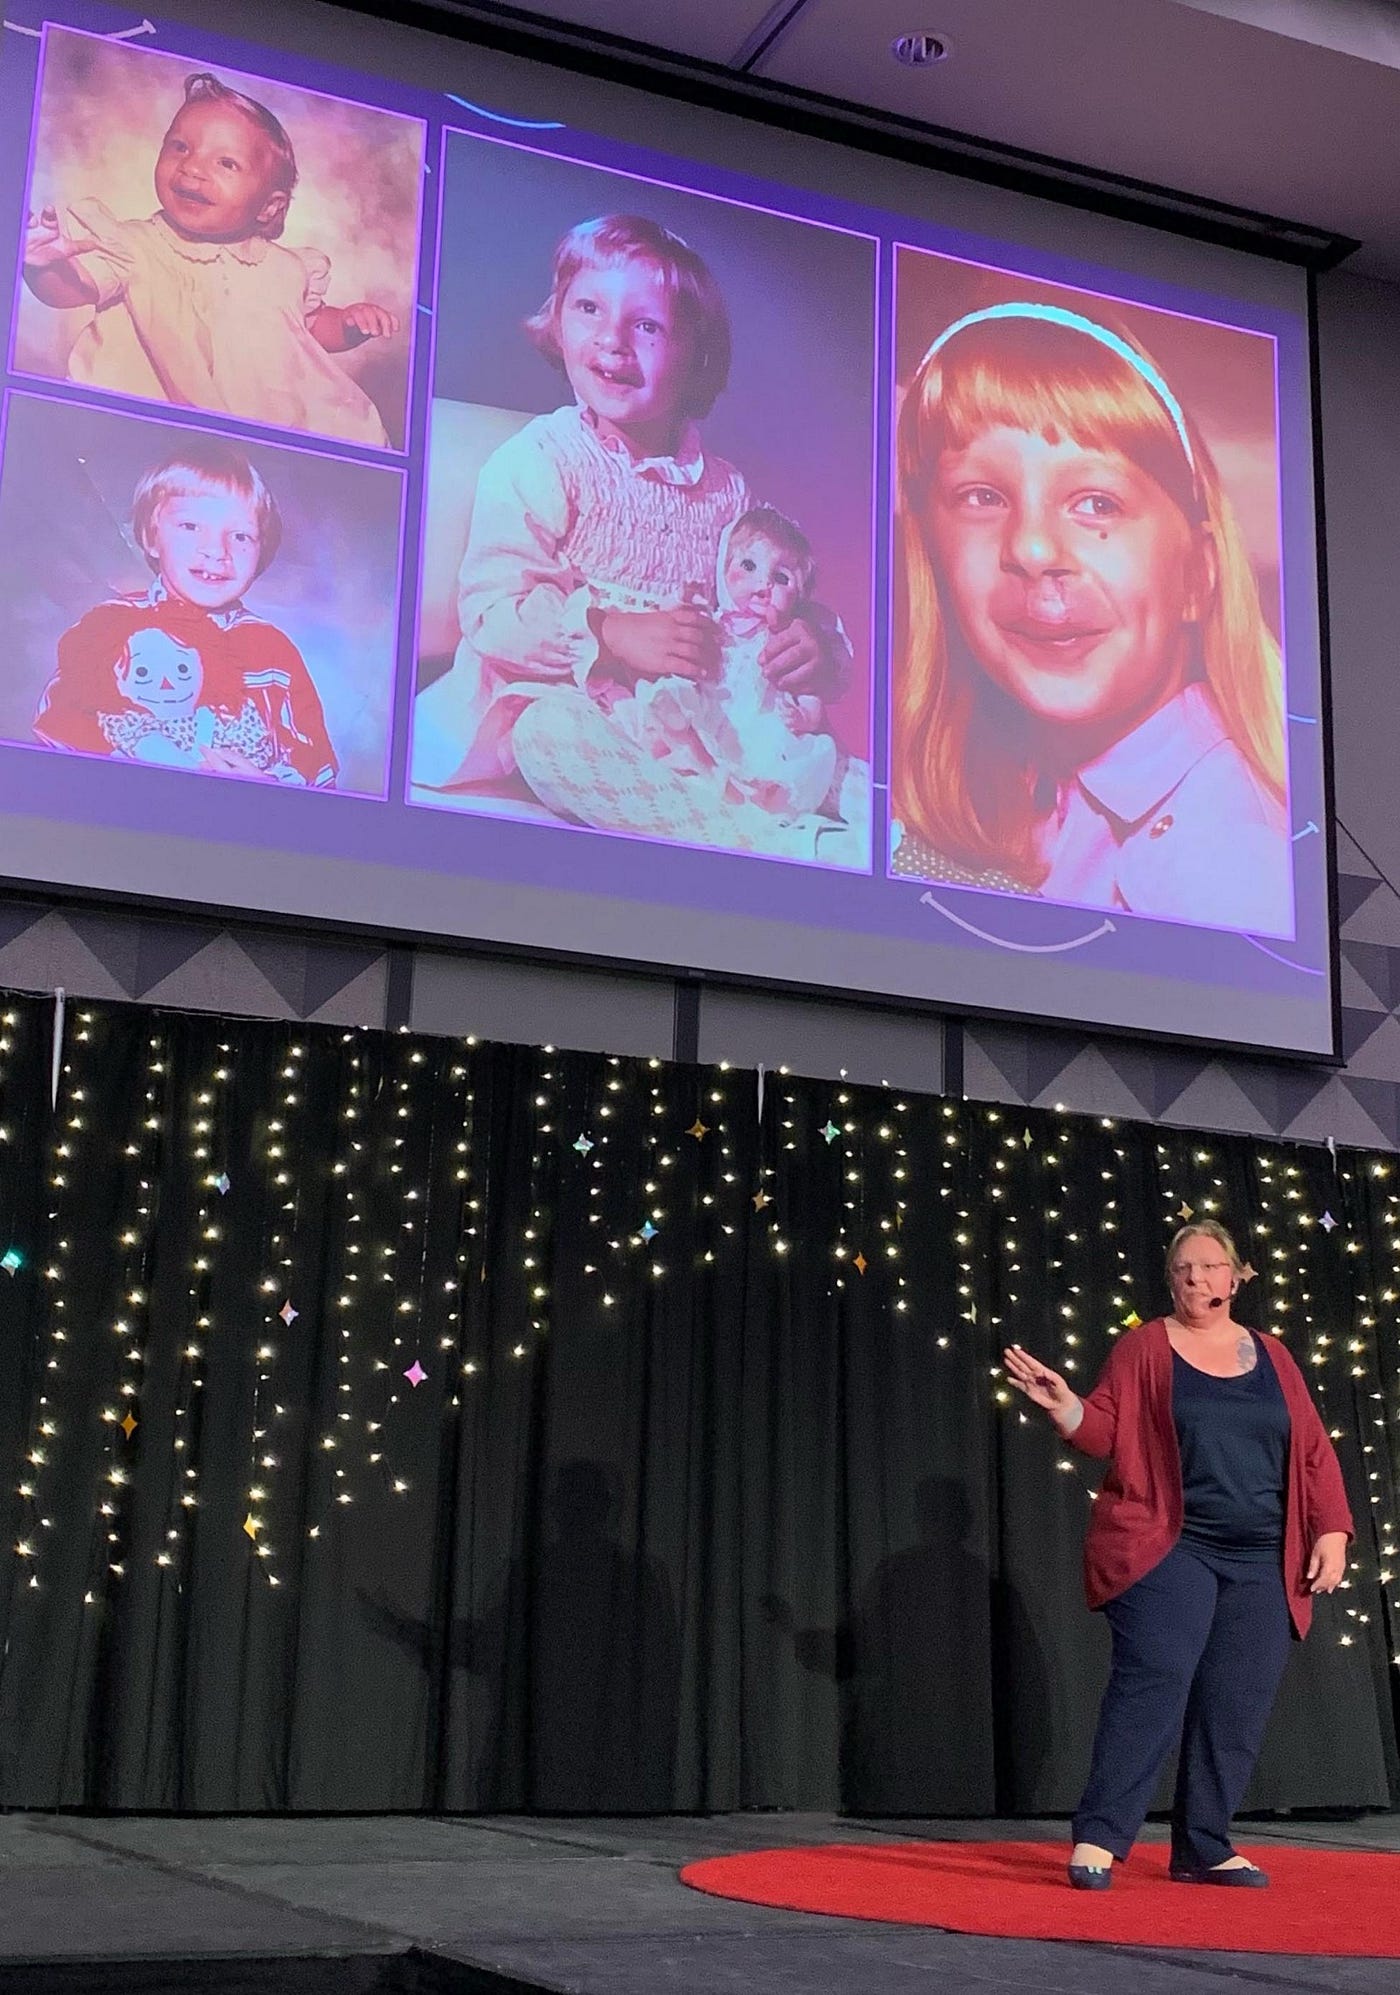 Christine Errico Cleft Lip and Palate Confidence Coach - Giving Her TEDx Talk